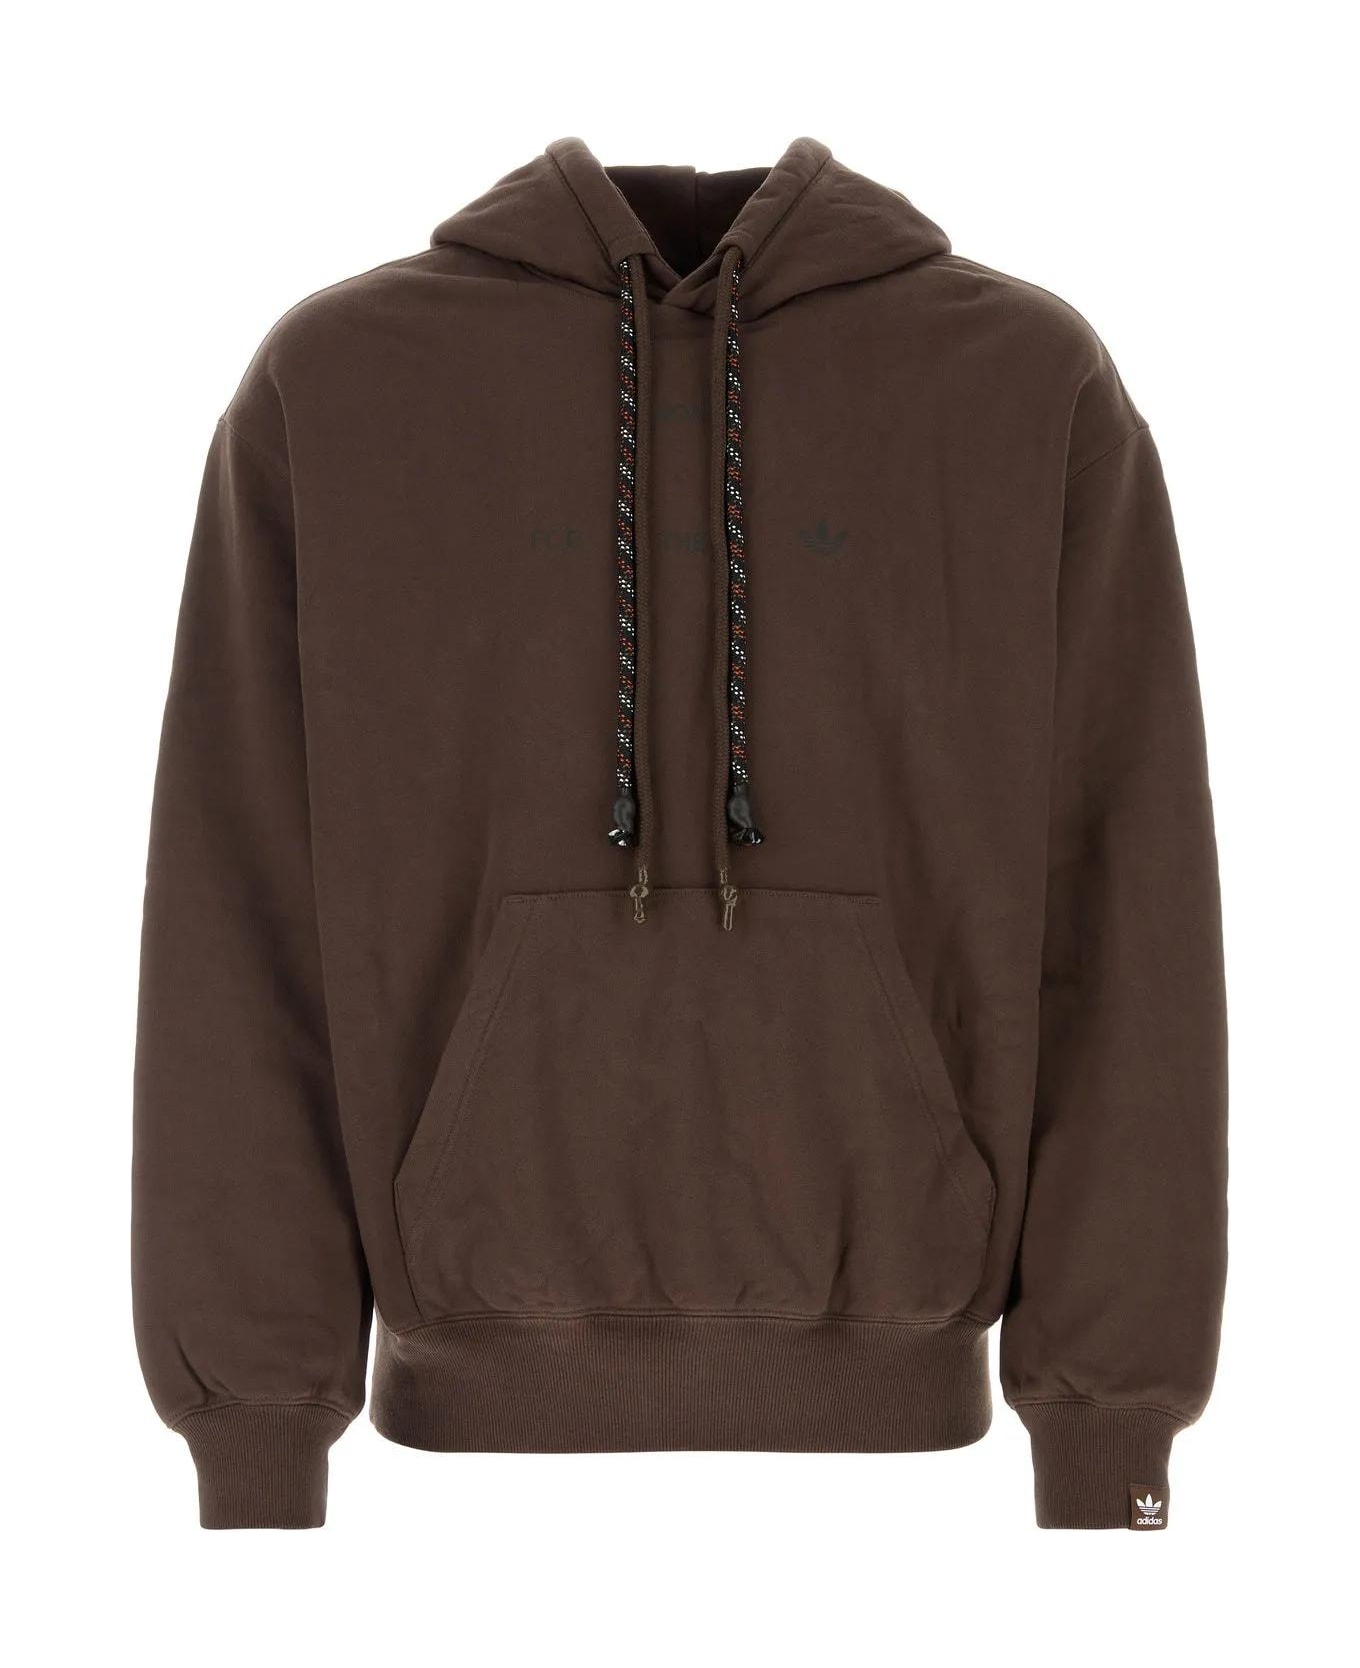 Adidas Brown Cotton Adidas X Song For The Mute Sweatshirt - BROWN フリース